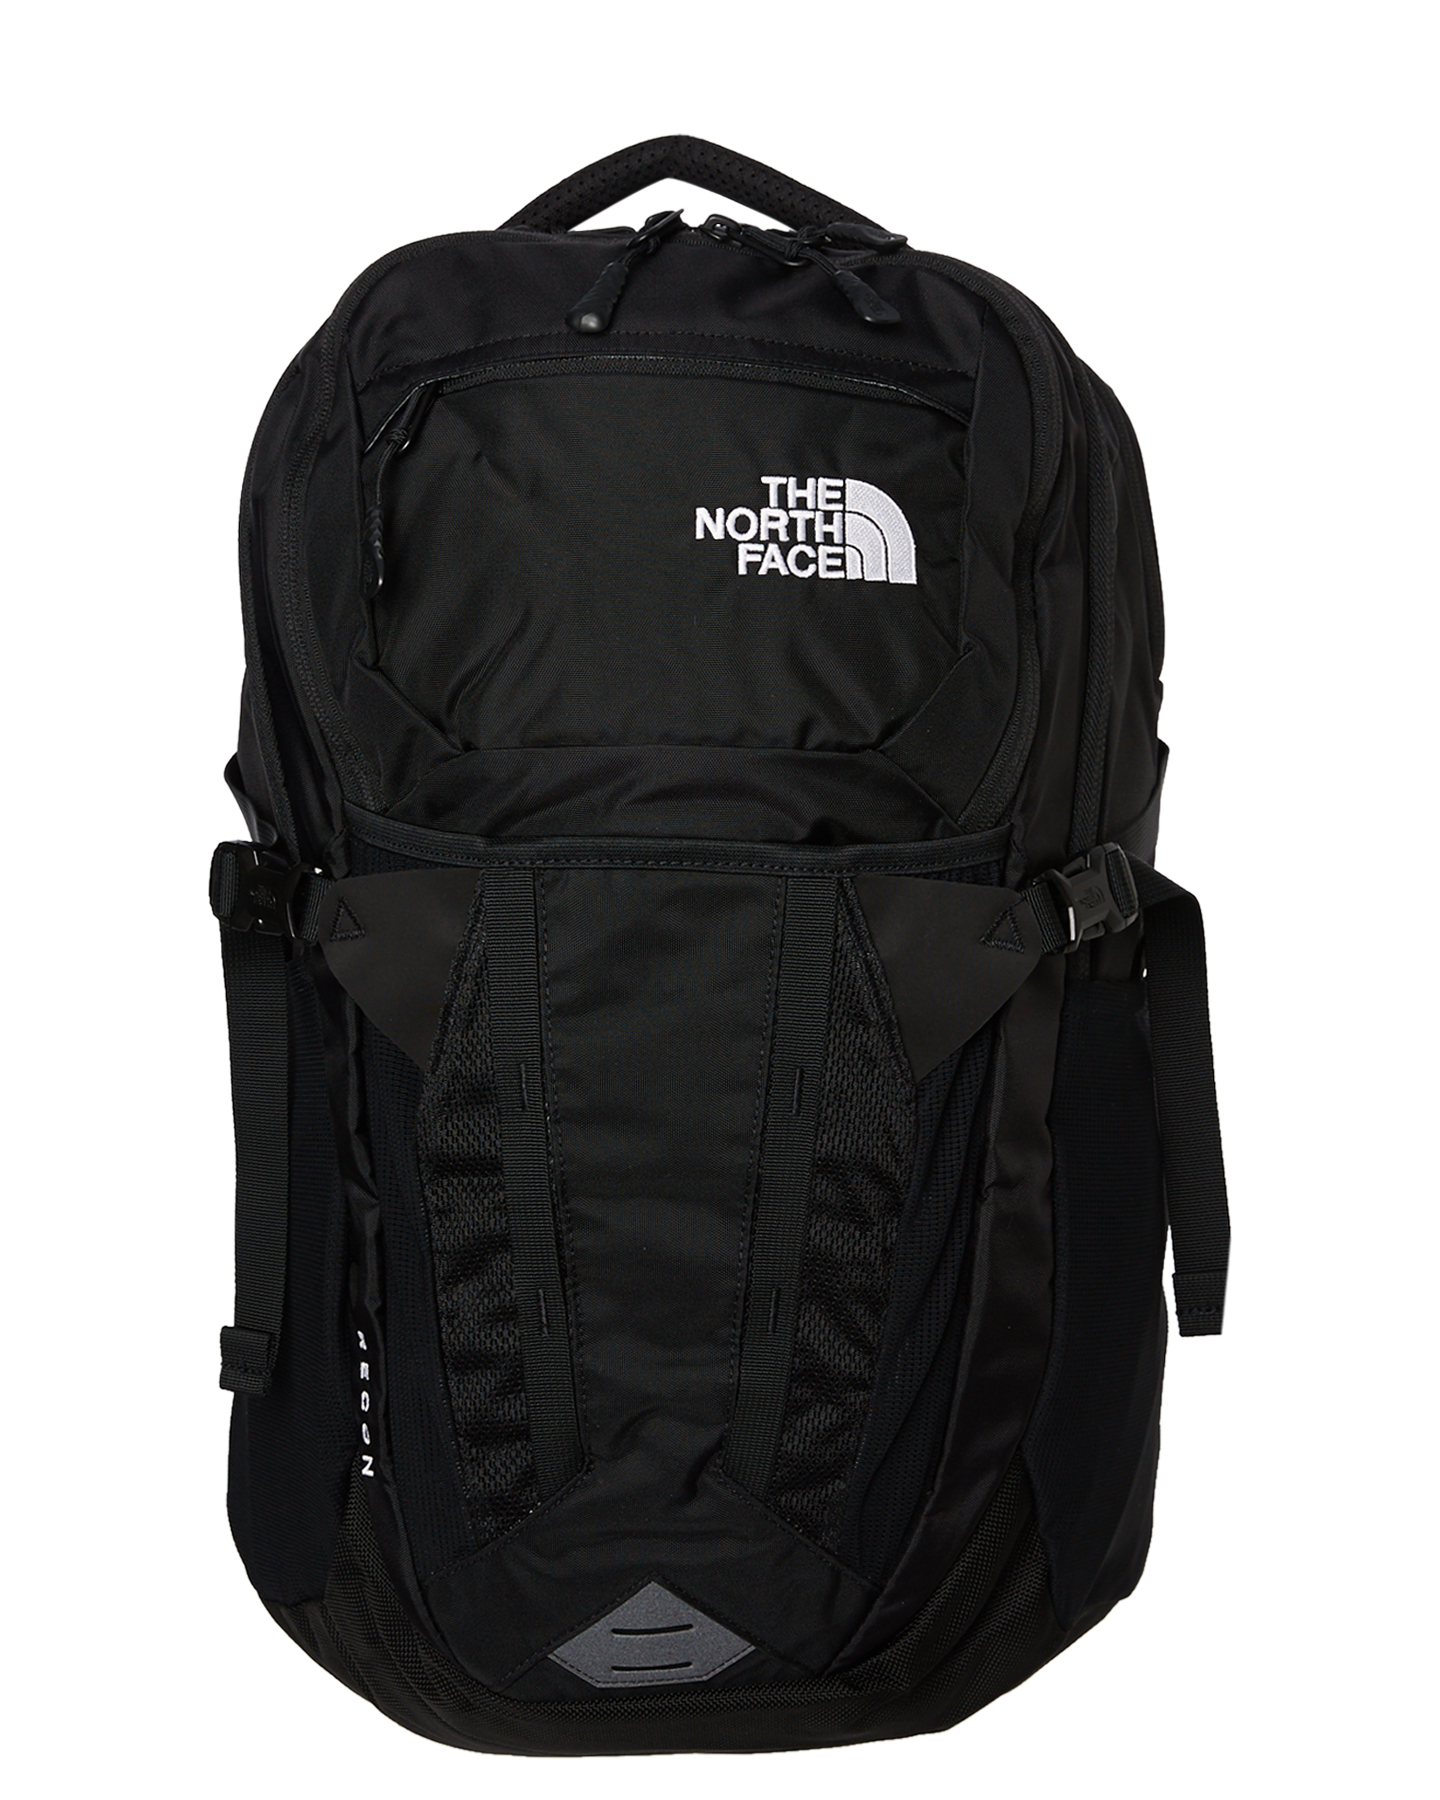 the north face backpack cheap Online 